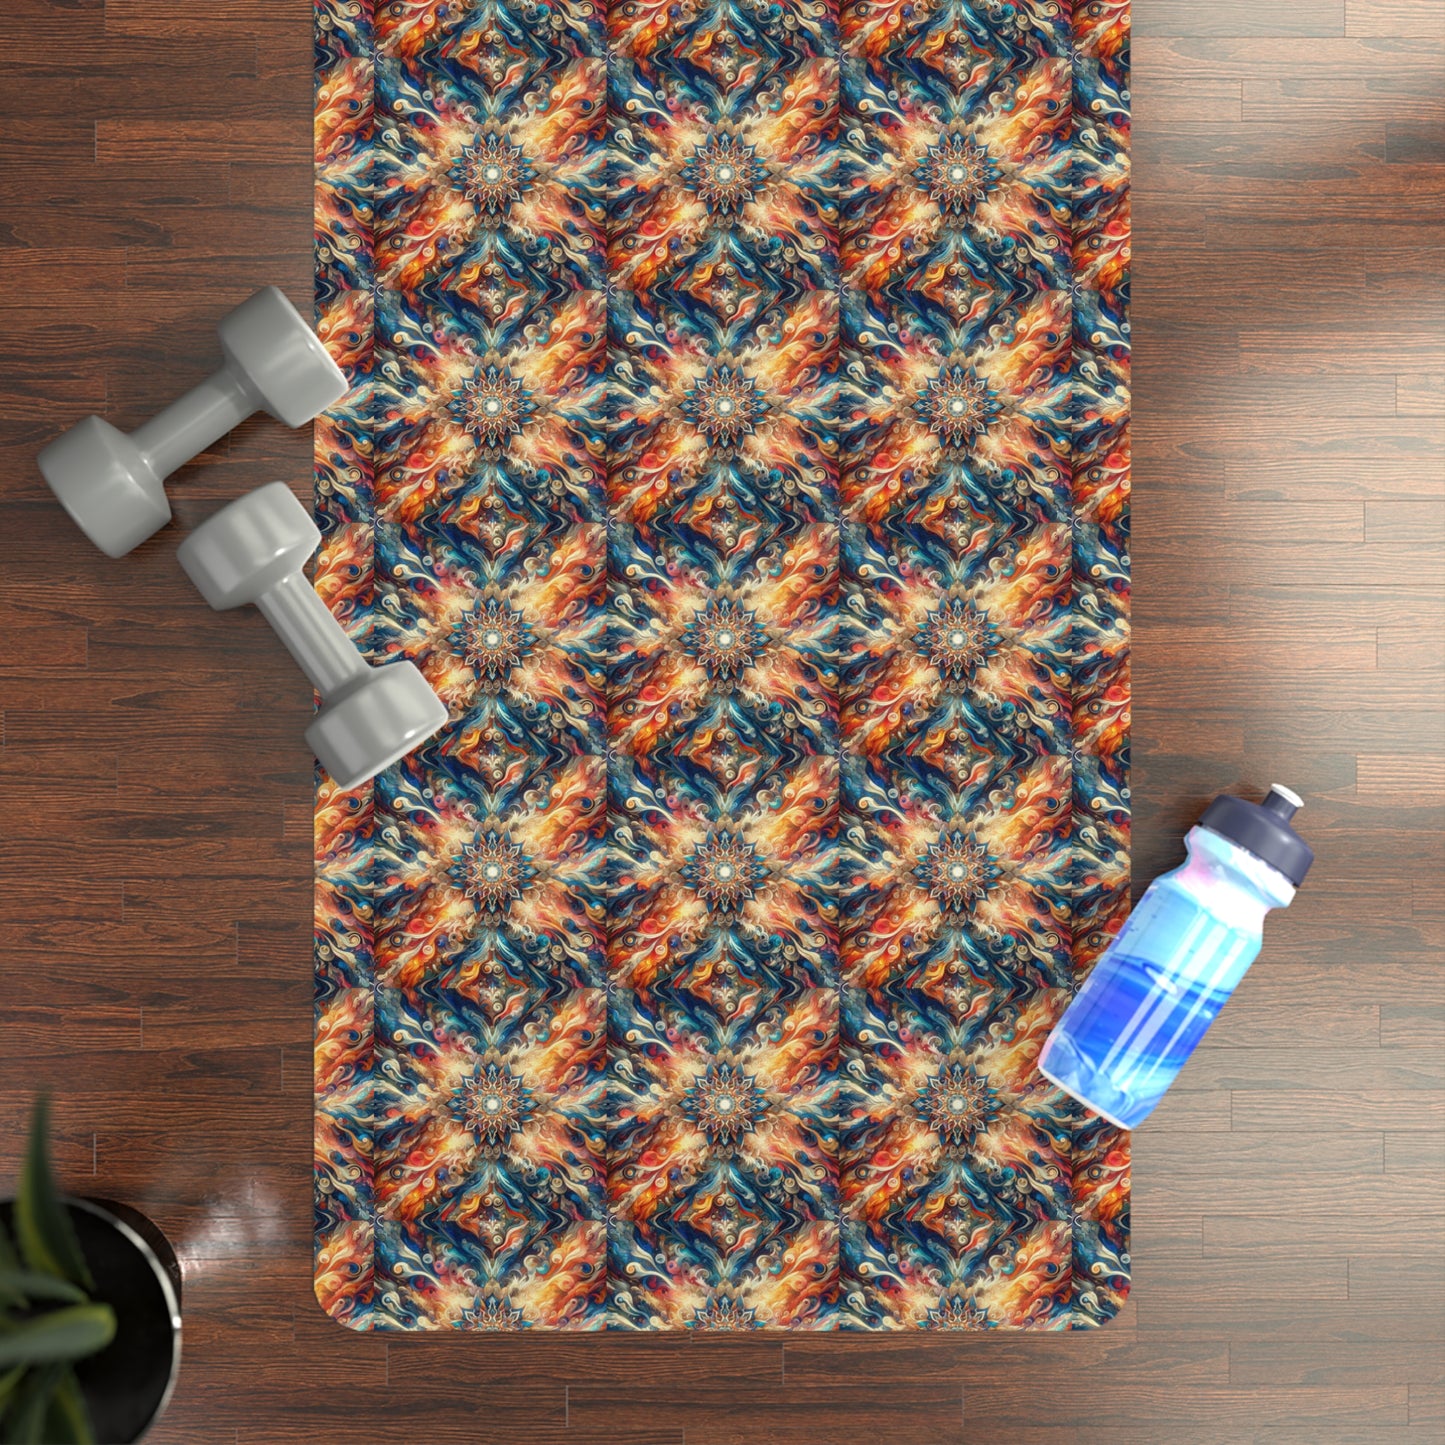 Cultural Mosaic Yoga Mat: Deluxe Microfiber with Vibrant World Design